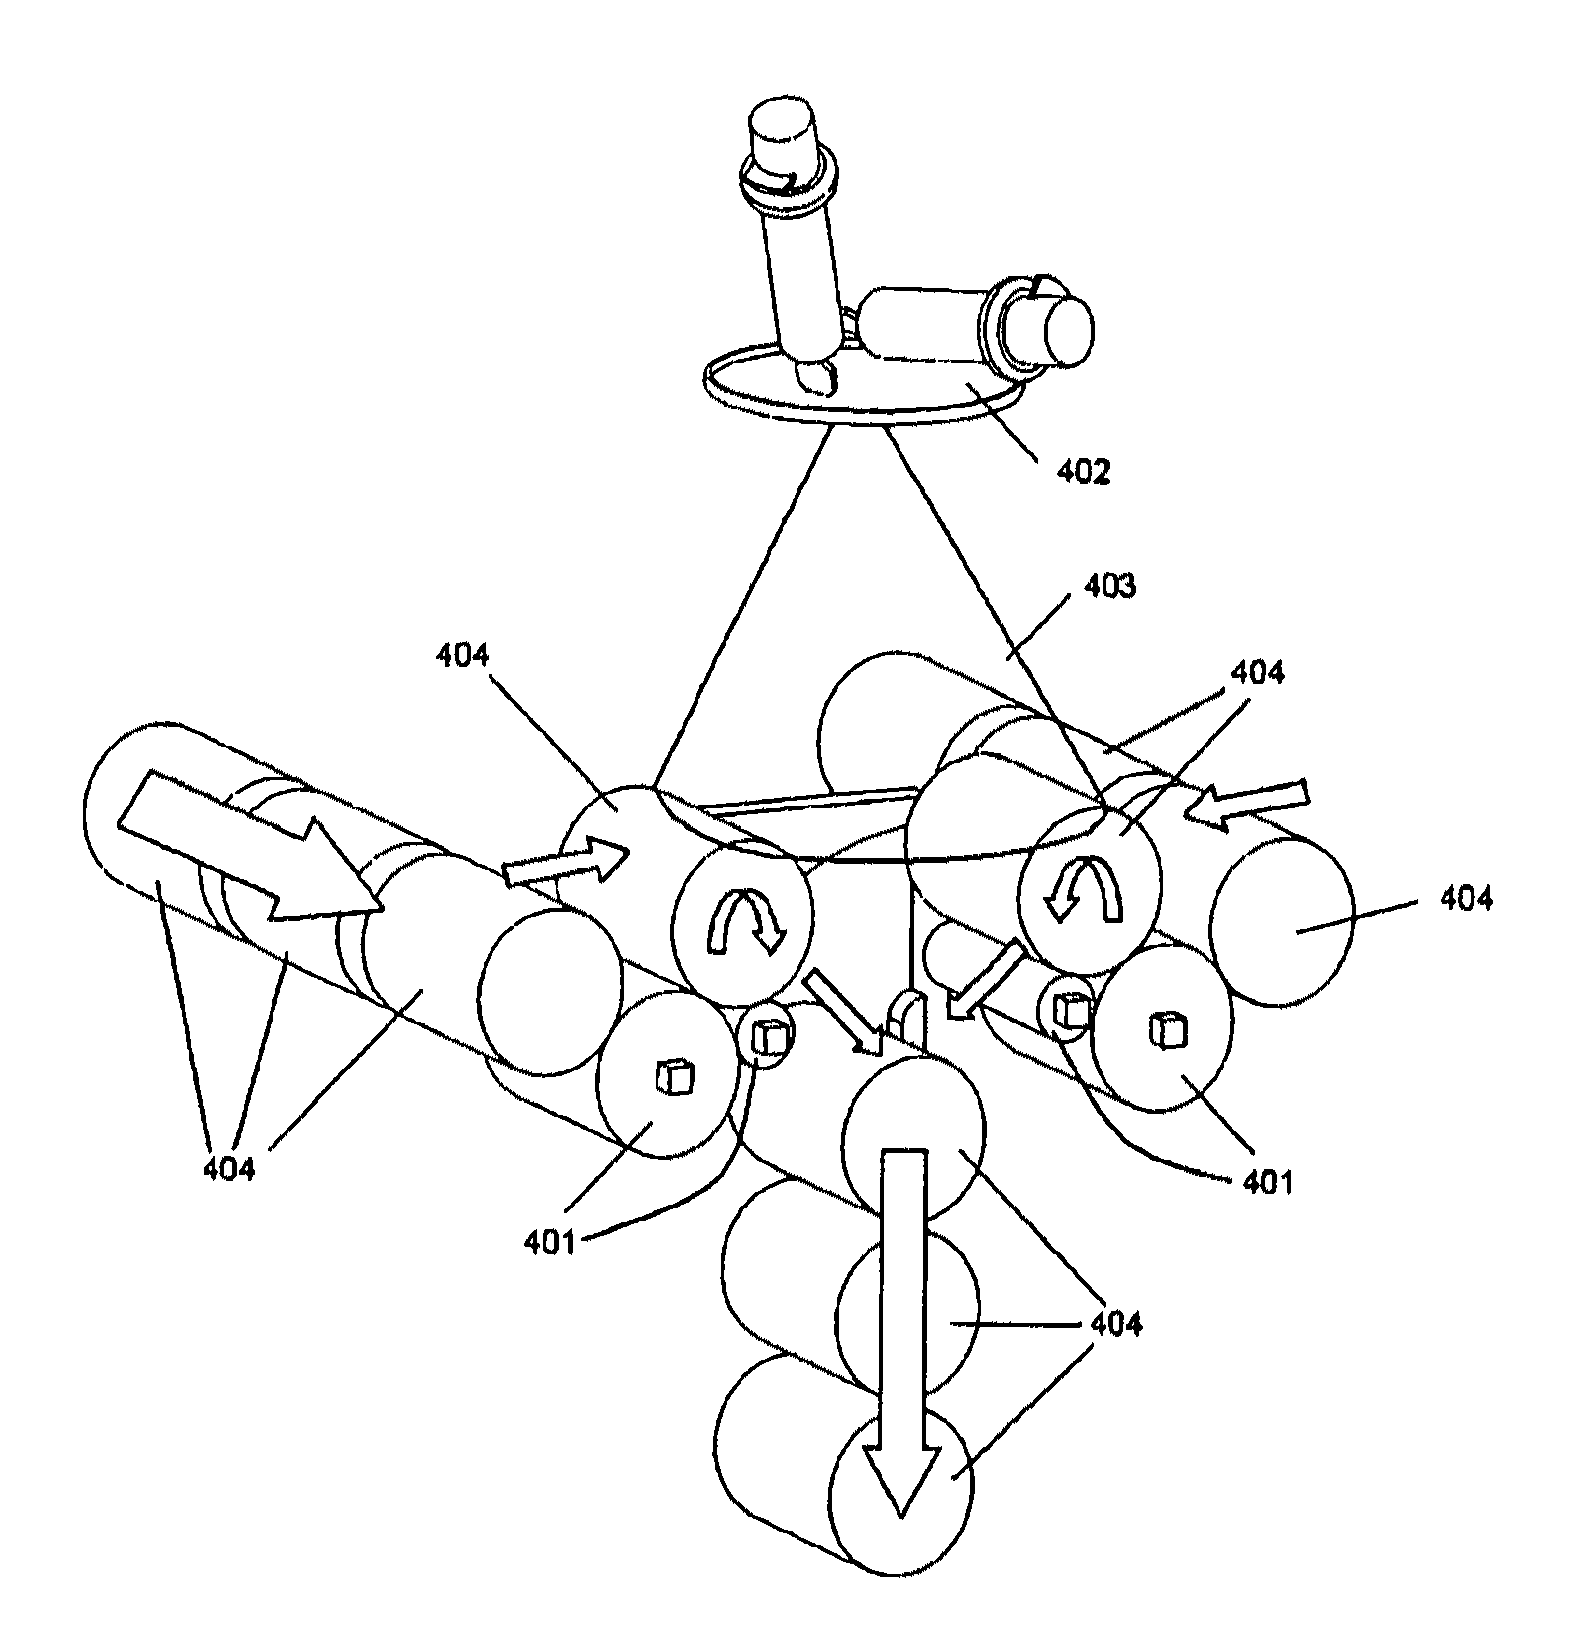 Method and device for rotational marking